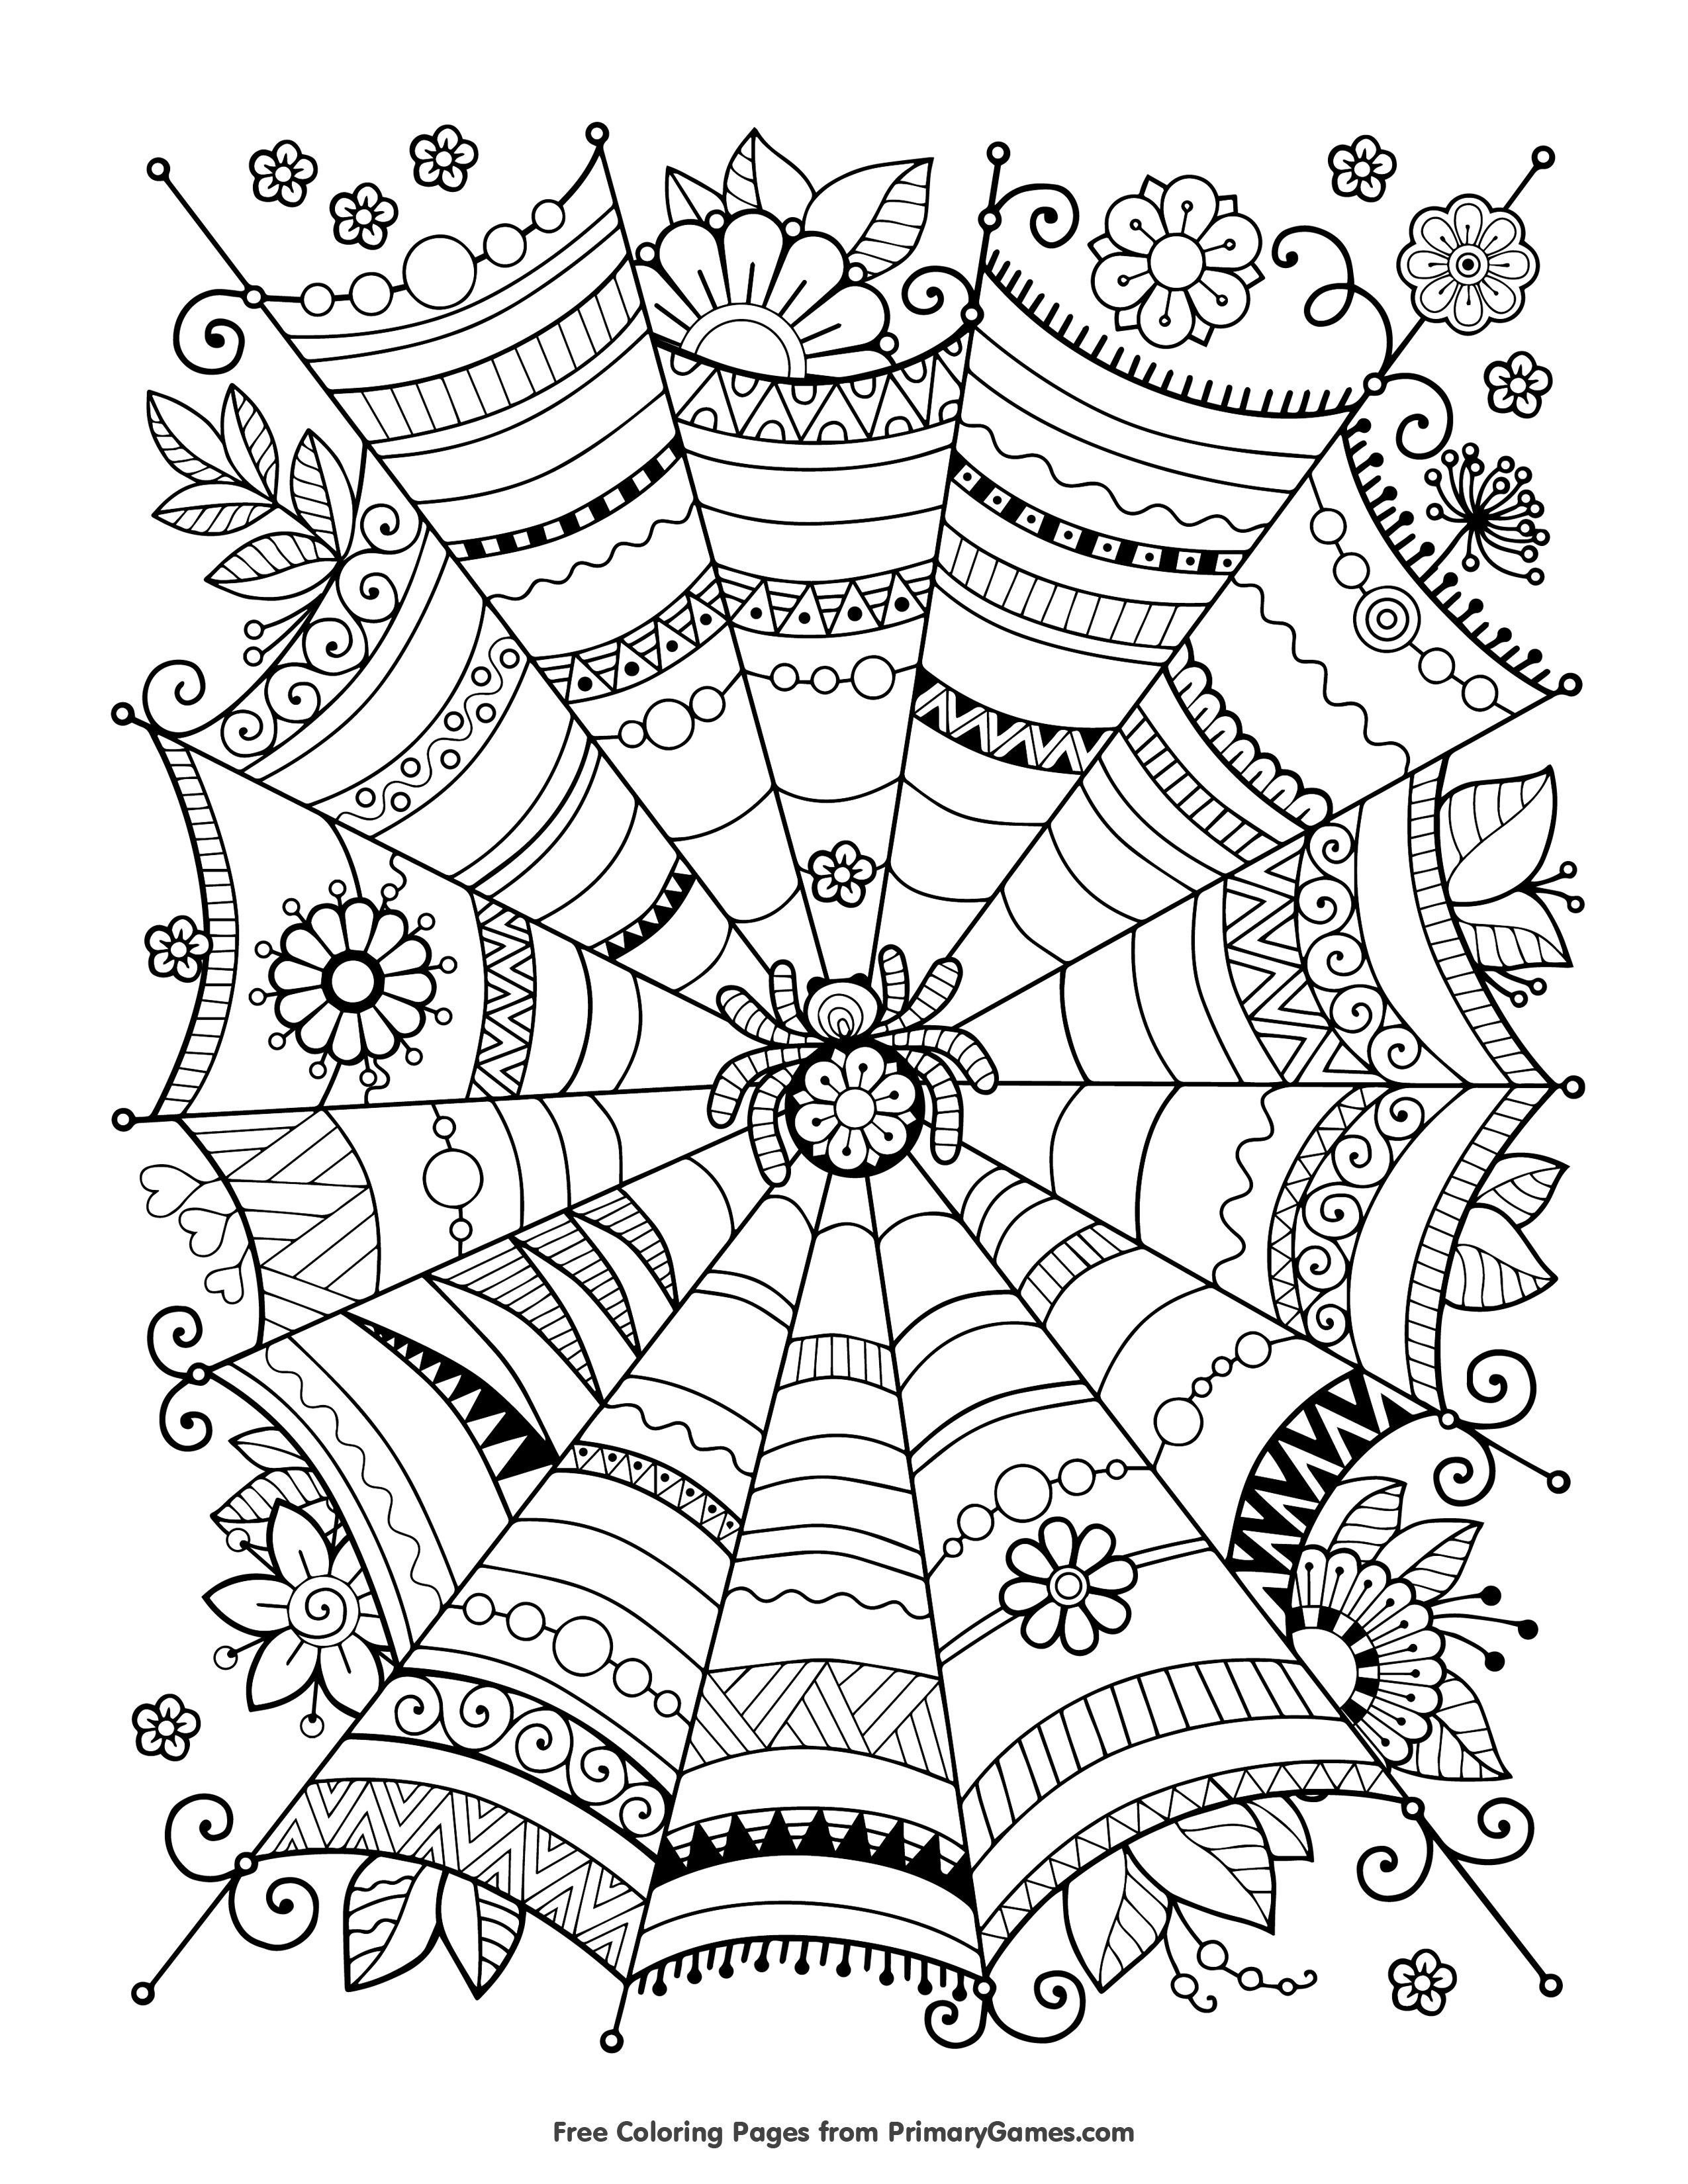 Free Halloween Coloring Pages For Adults &amp;amp; Kids - Happiness Is Homemade - Free Printable Coloring Cards For Adults